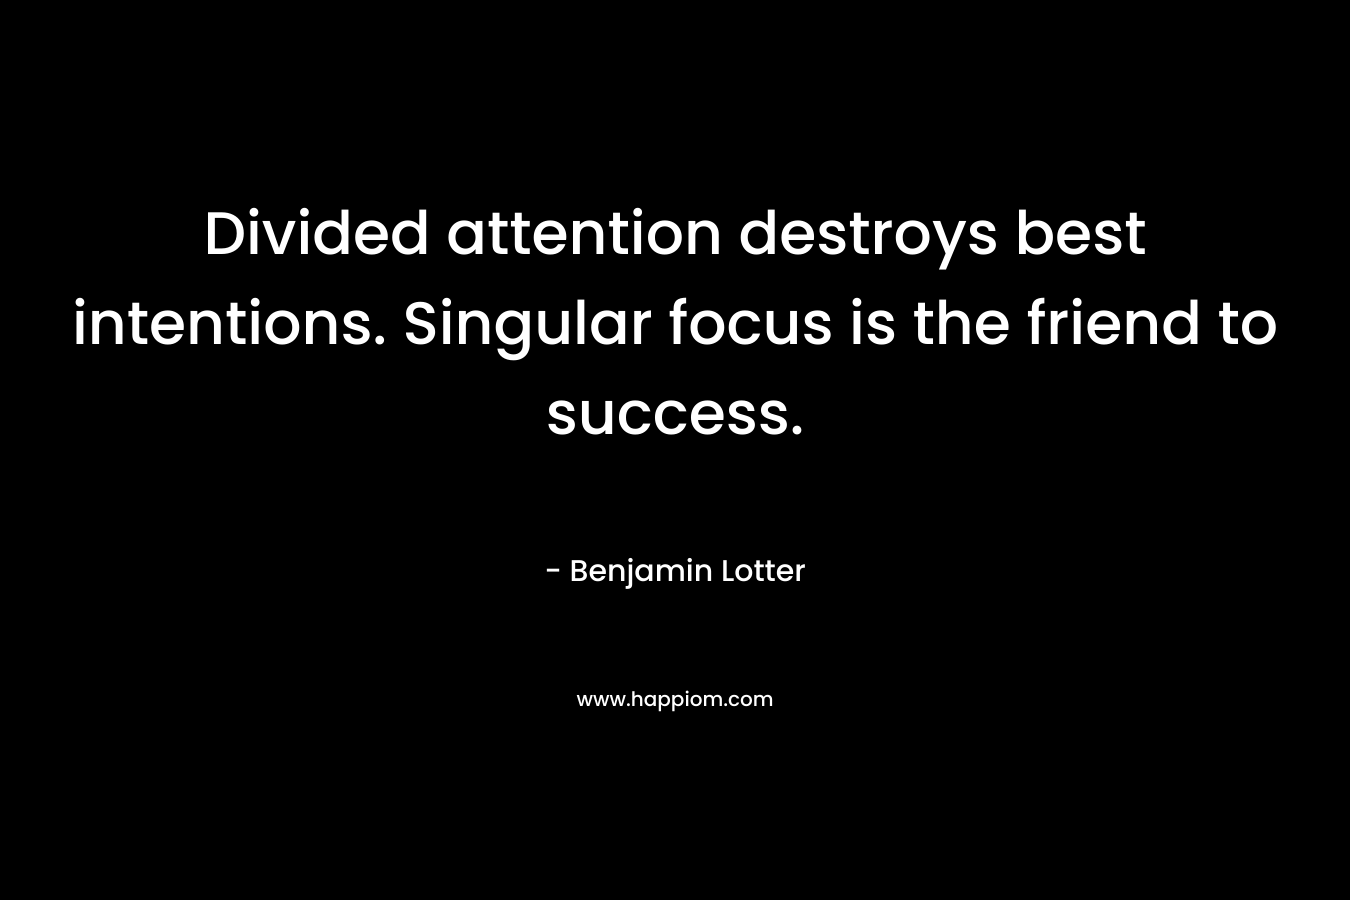 Divided attention destroys best intentions. Singular focus is the friend to success.